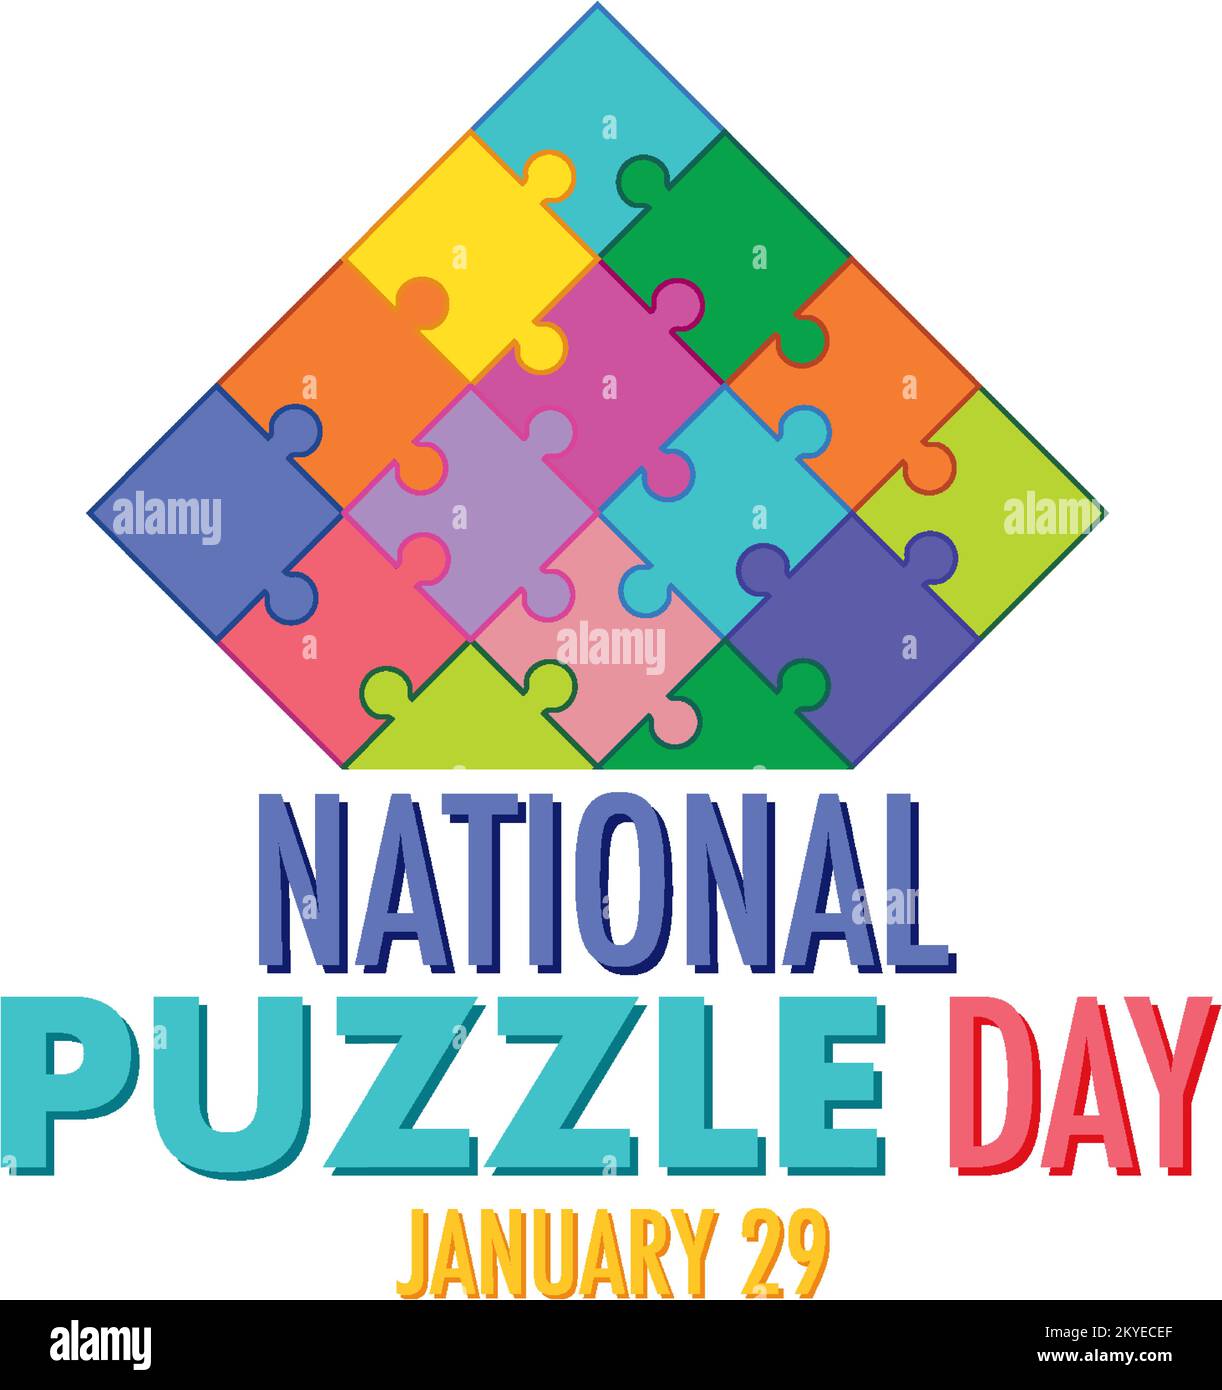 National Puzzle Day Banner illustration Stock Vector